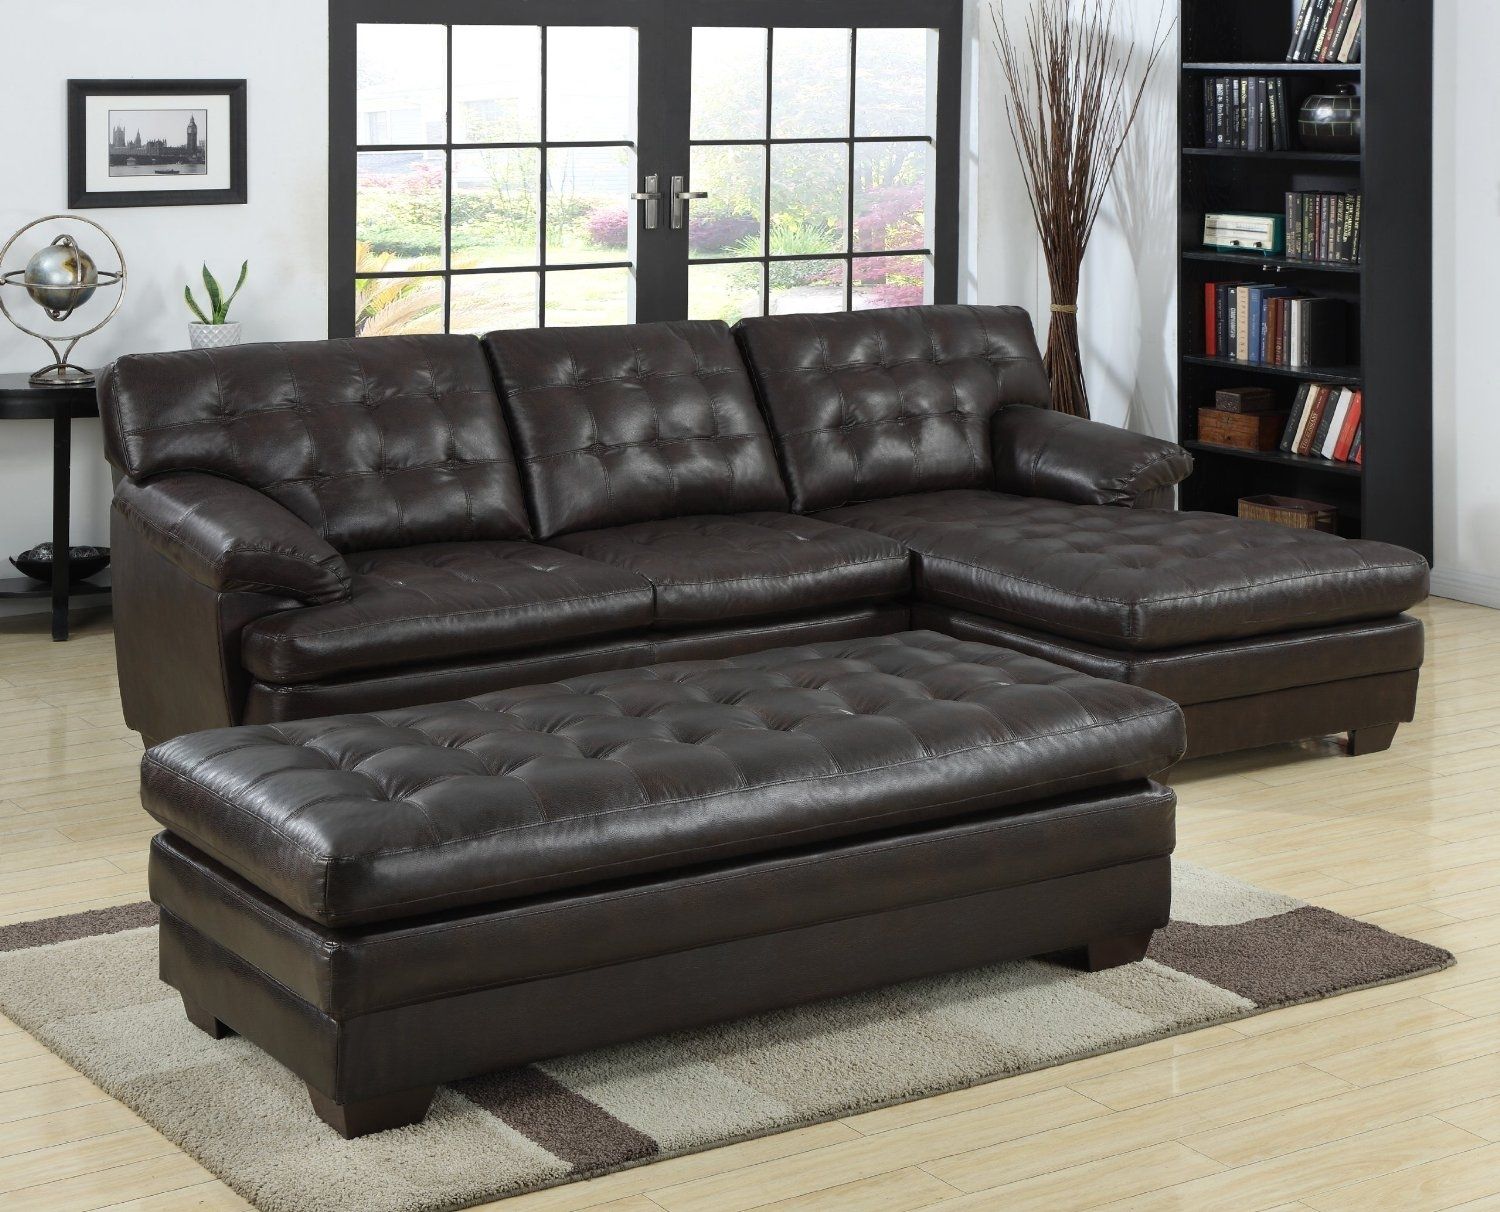 Black Tufted Leather Sectional Sofa With Chaise And Bench Seat Plus Pertaining To Leather Sectionals With Chaise And Ottoman (View 4 of 15)